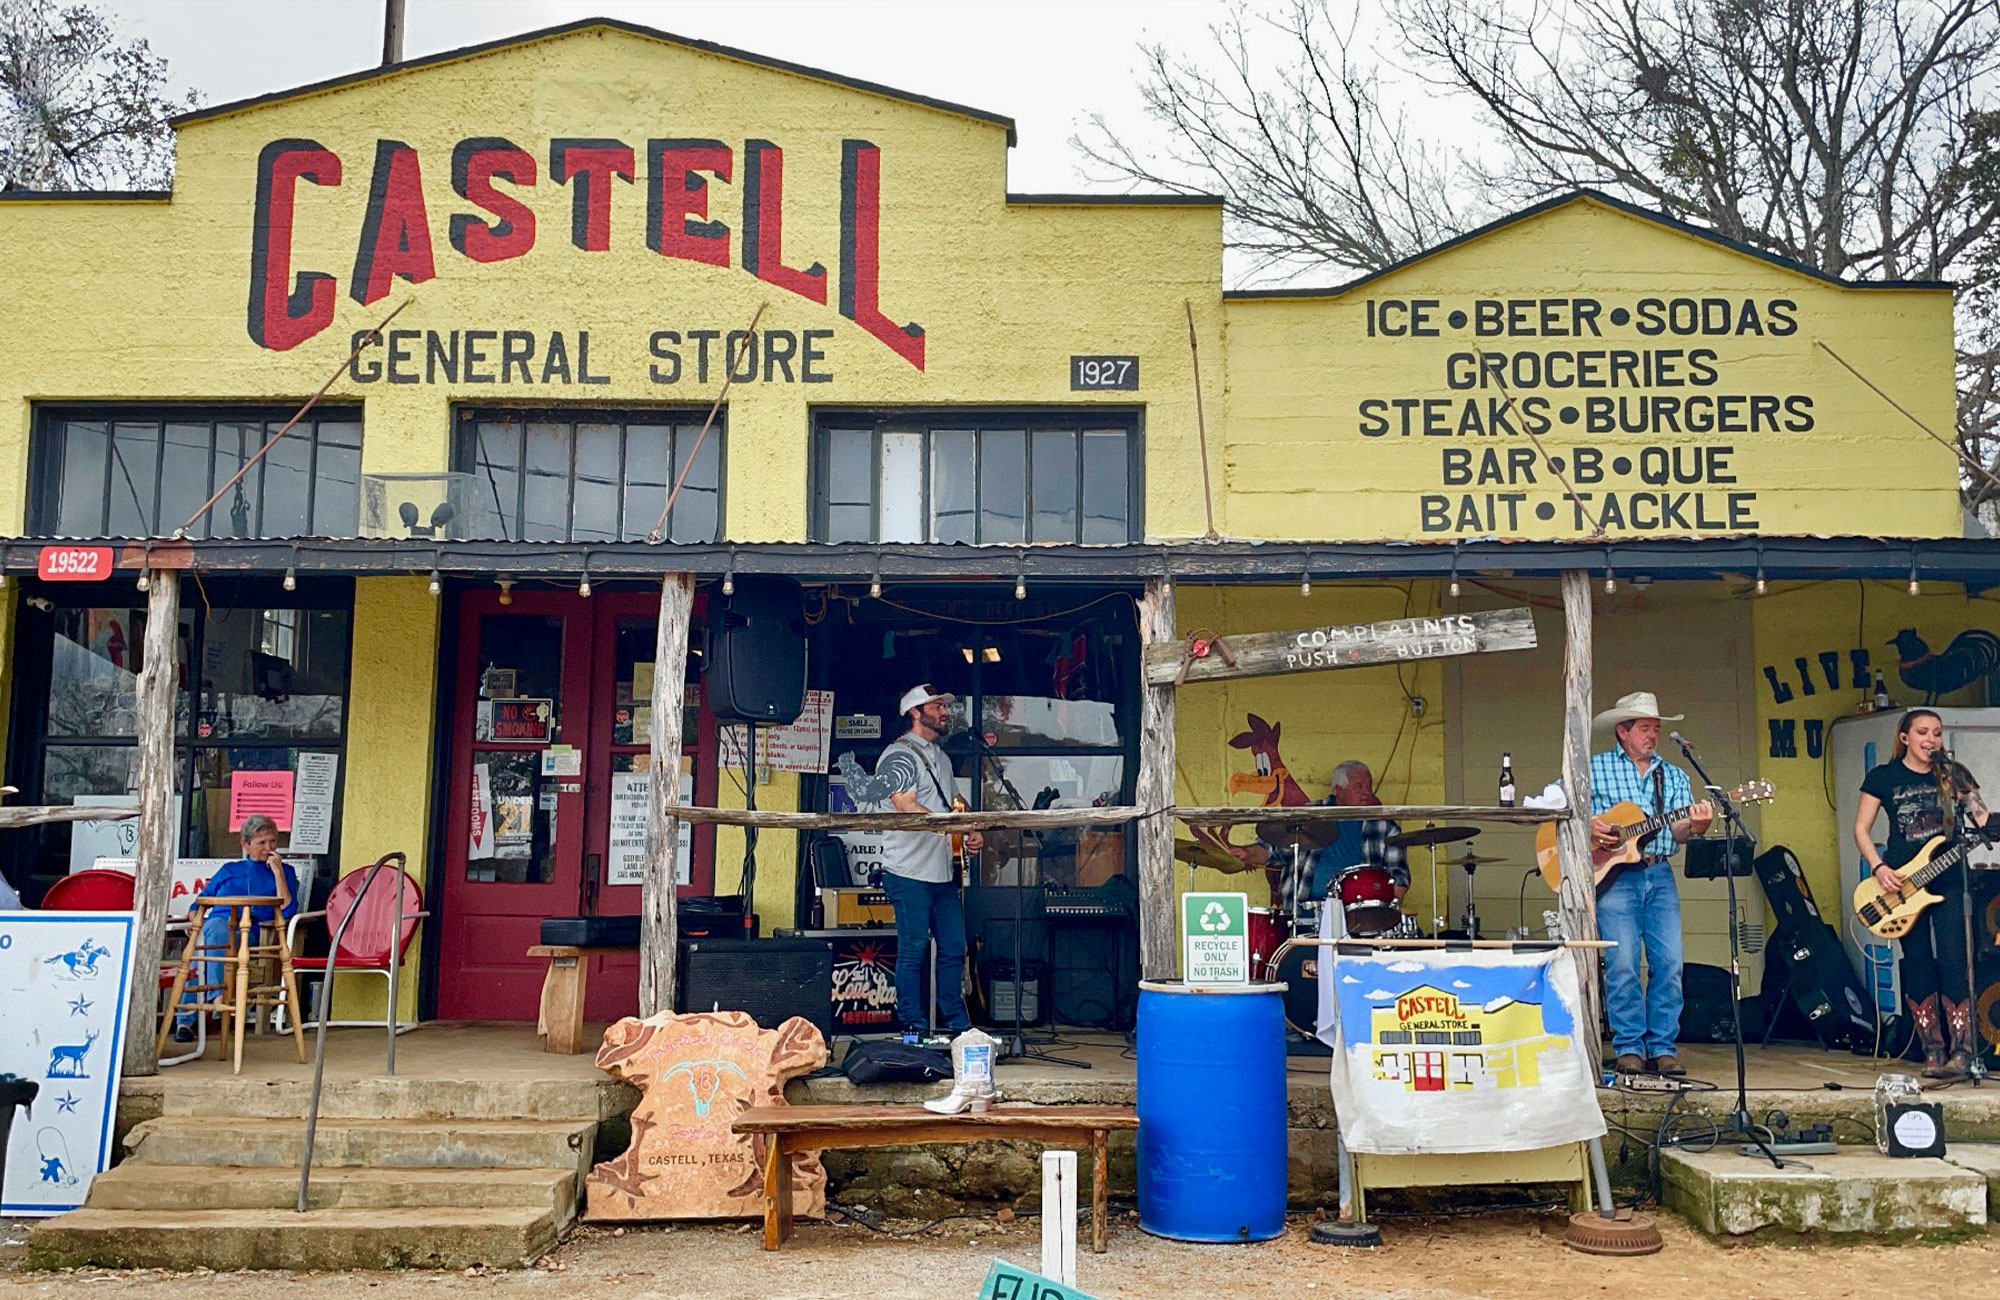 Castell General Store Hosts Live Music on the Weekends